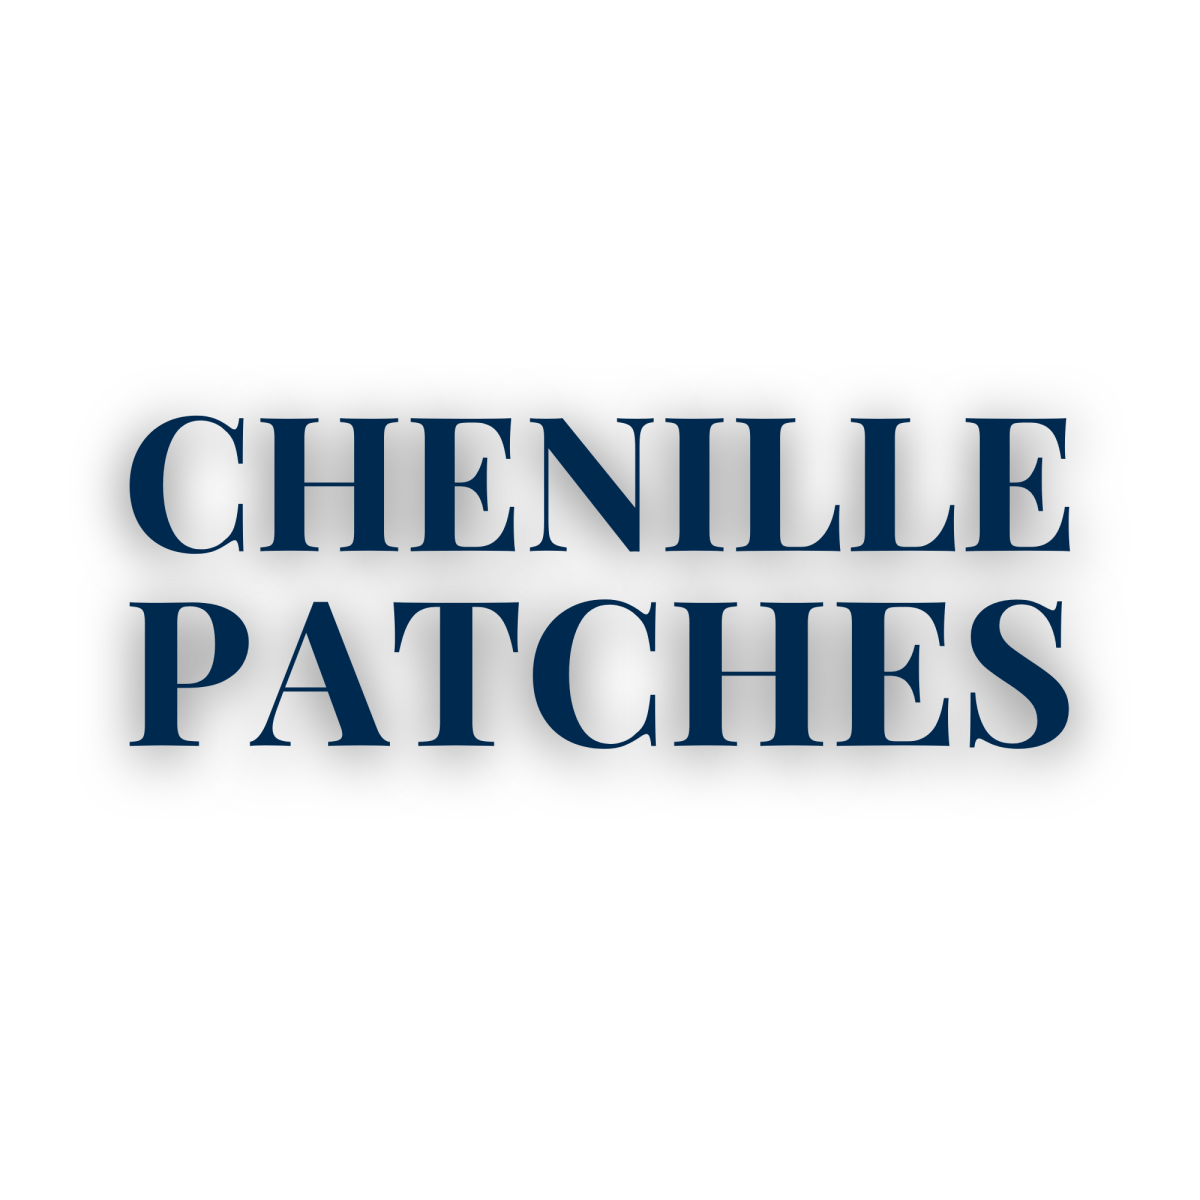 Chenille Patches - 2 Moms Craft Shack